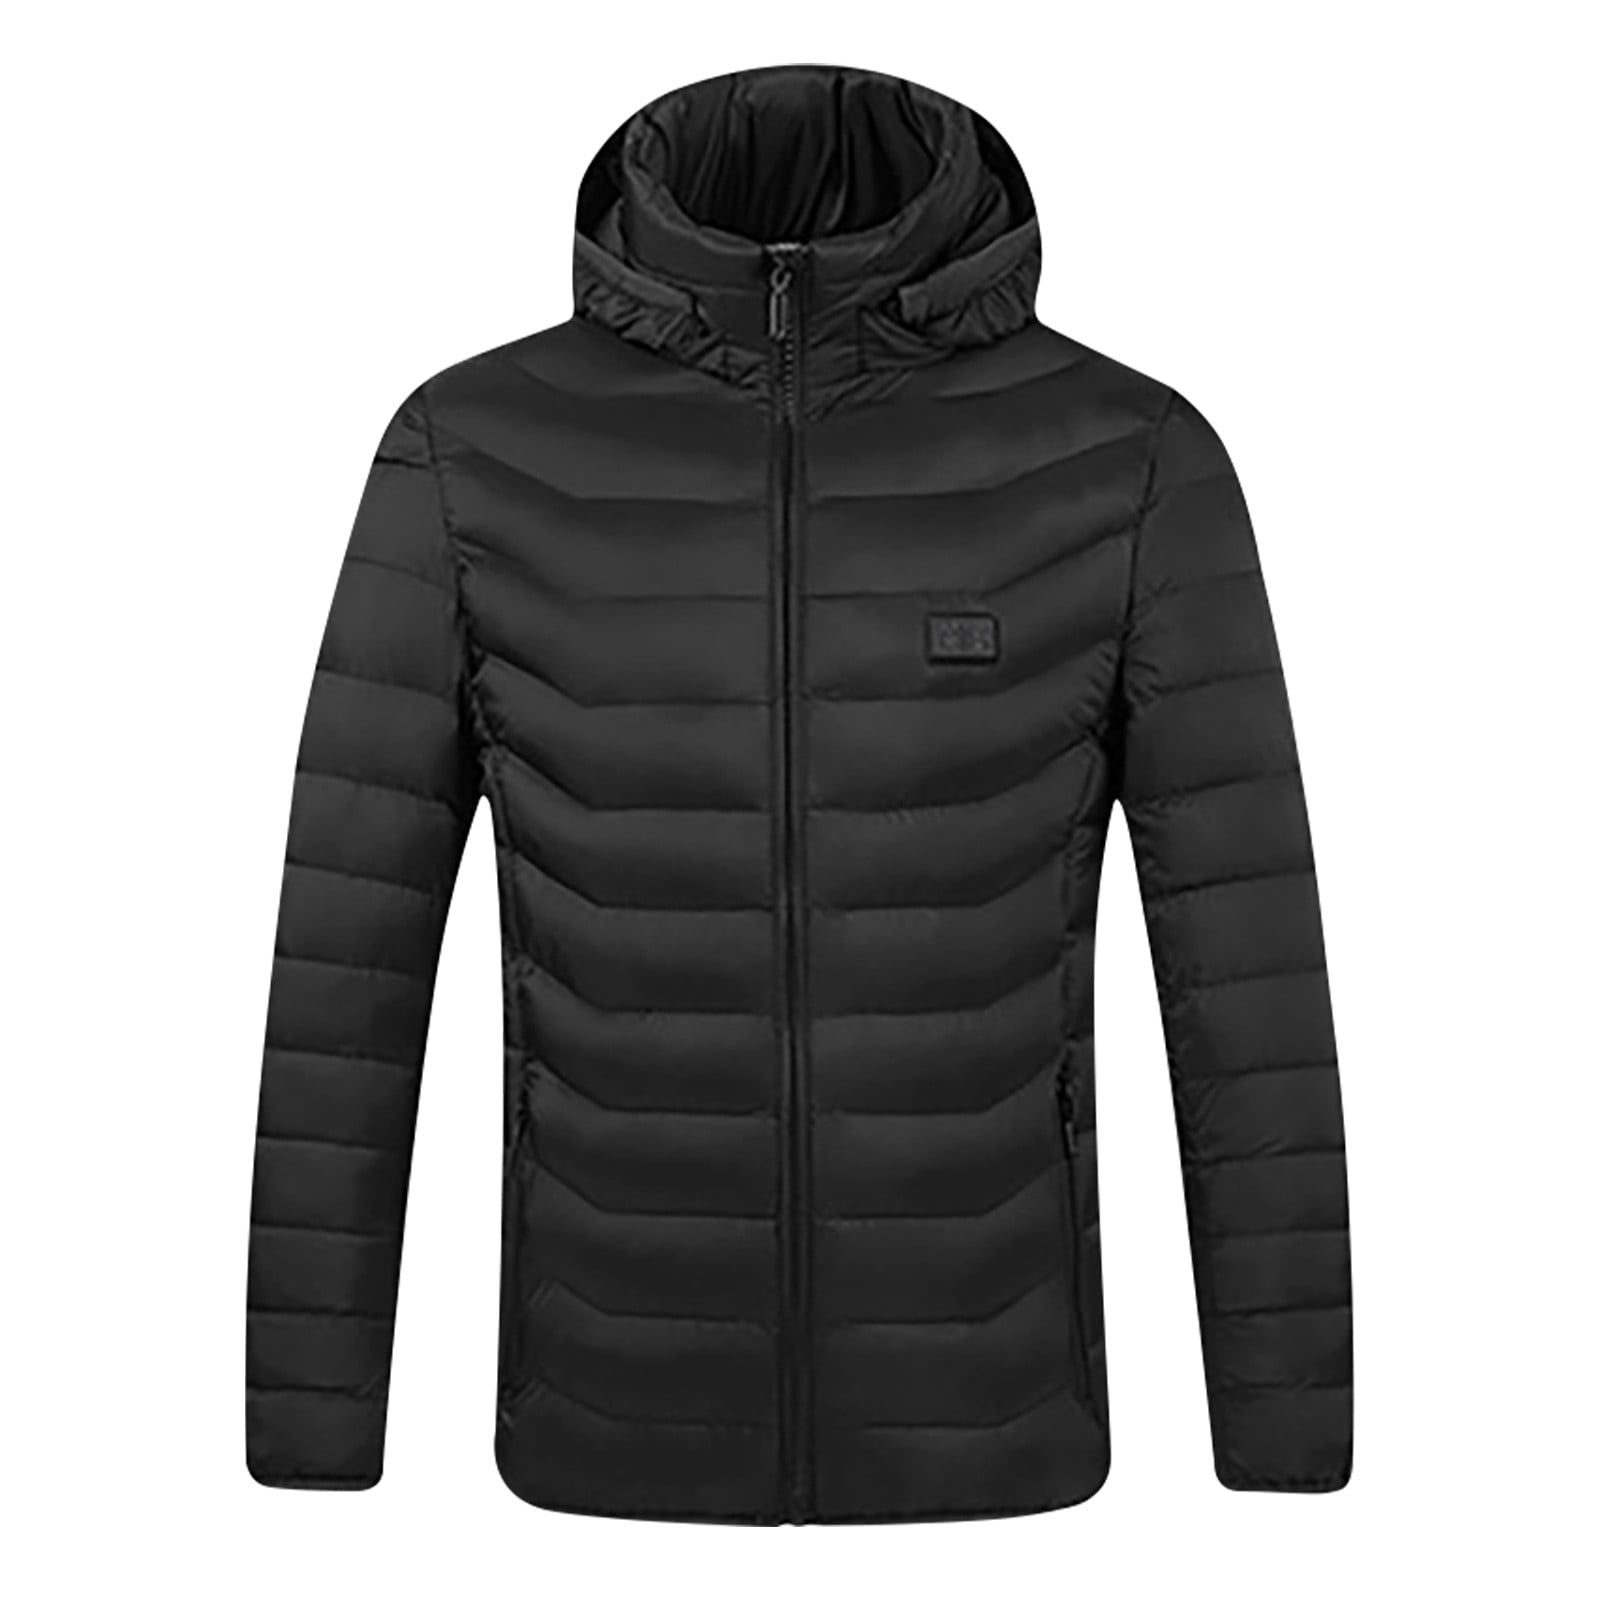 Symoid Men and Womens Heated Coat,Mens Winter Jacket,Cooling